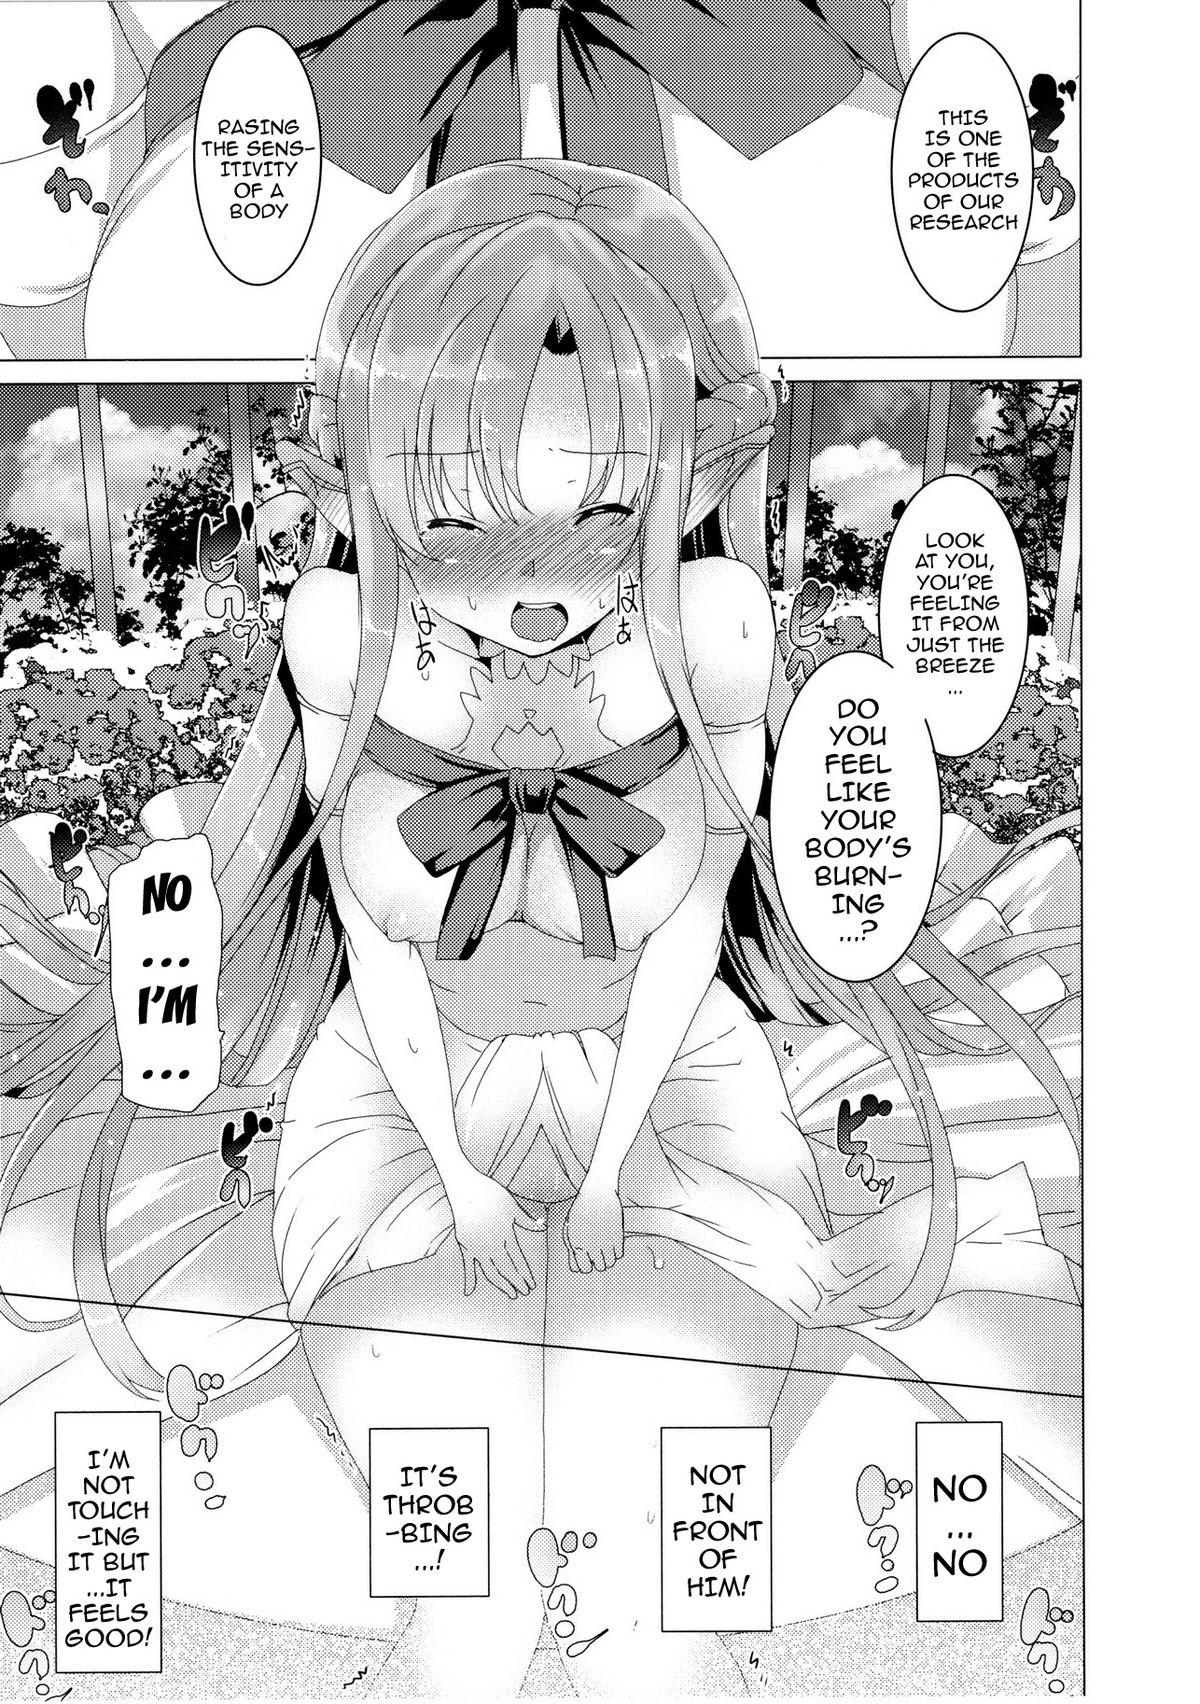 Friend Erasing Your Memory - Sword art online Asian Babes - Page 5